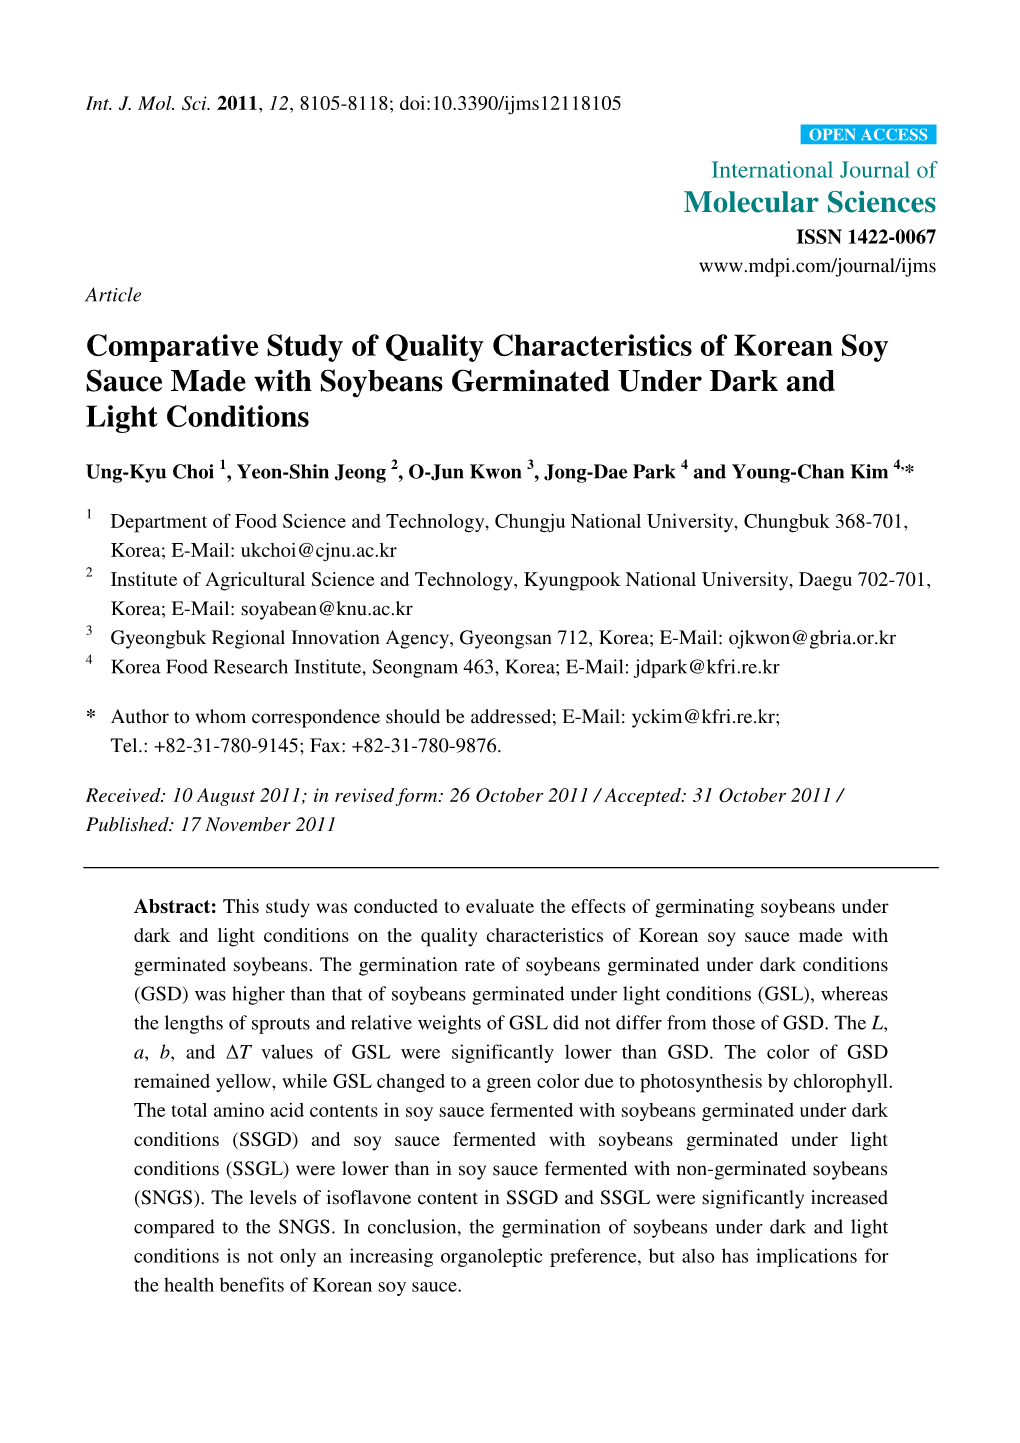 Comparative Study of Quality Characteristics of Korean Soy Sauce Made with Soybeans Germinated Under Dark and Light Conditions